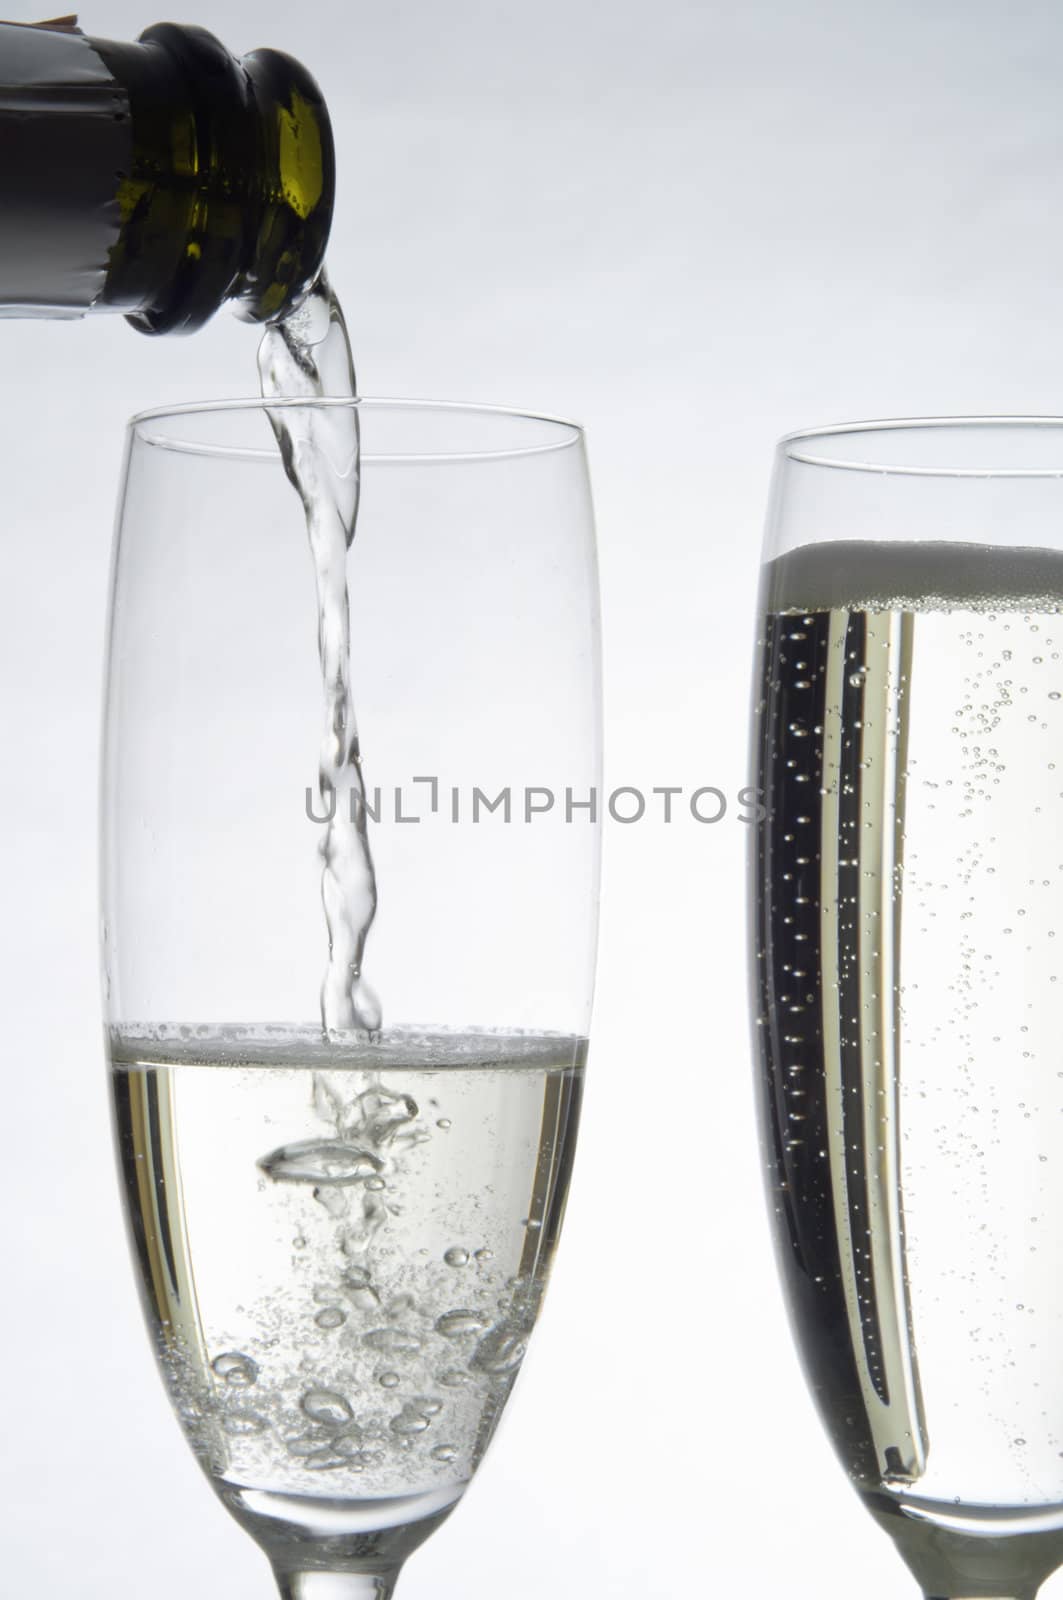 Action shot of a stream of Champagne pouring from a bottle into a fluted glass.  A second glass on the right is already filled.